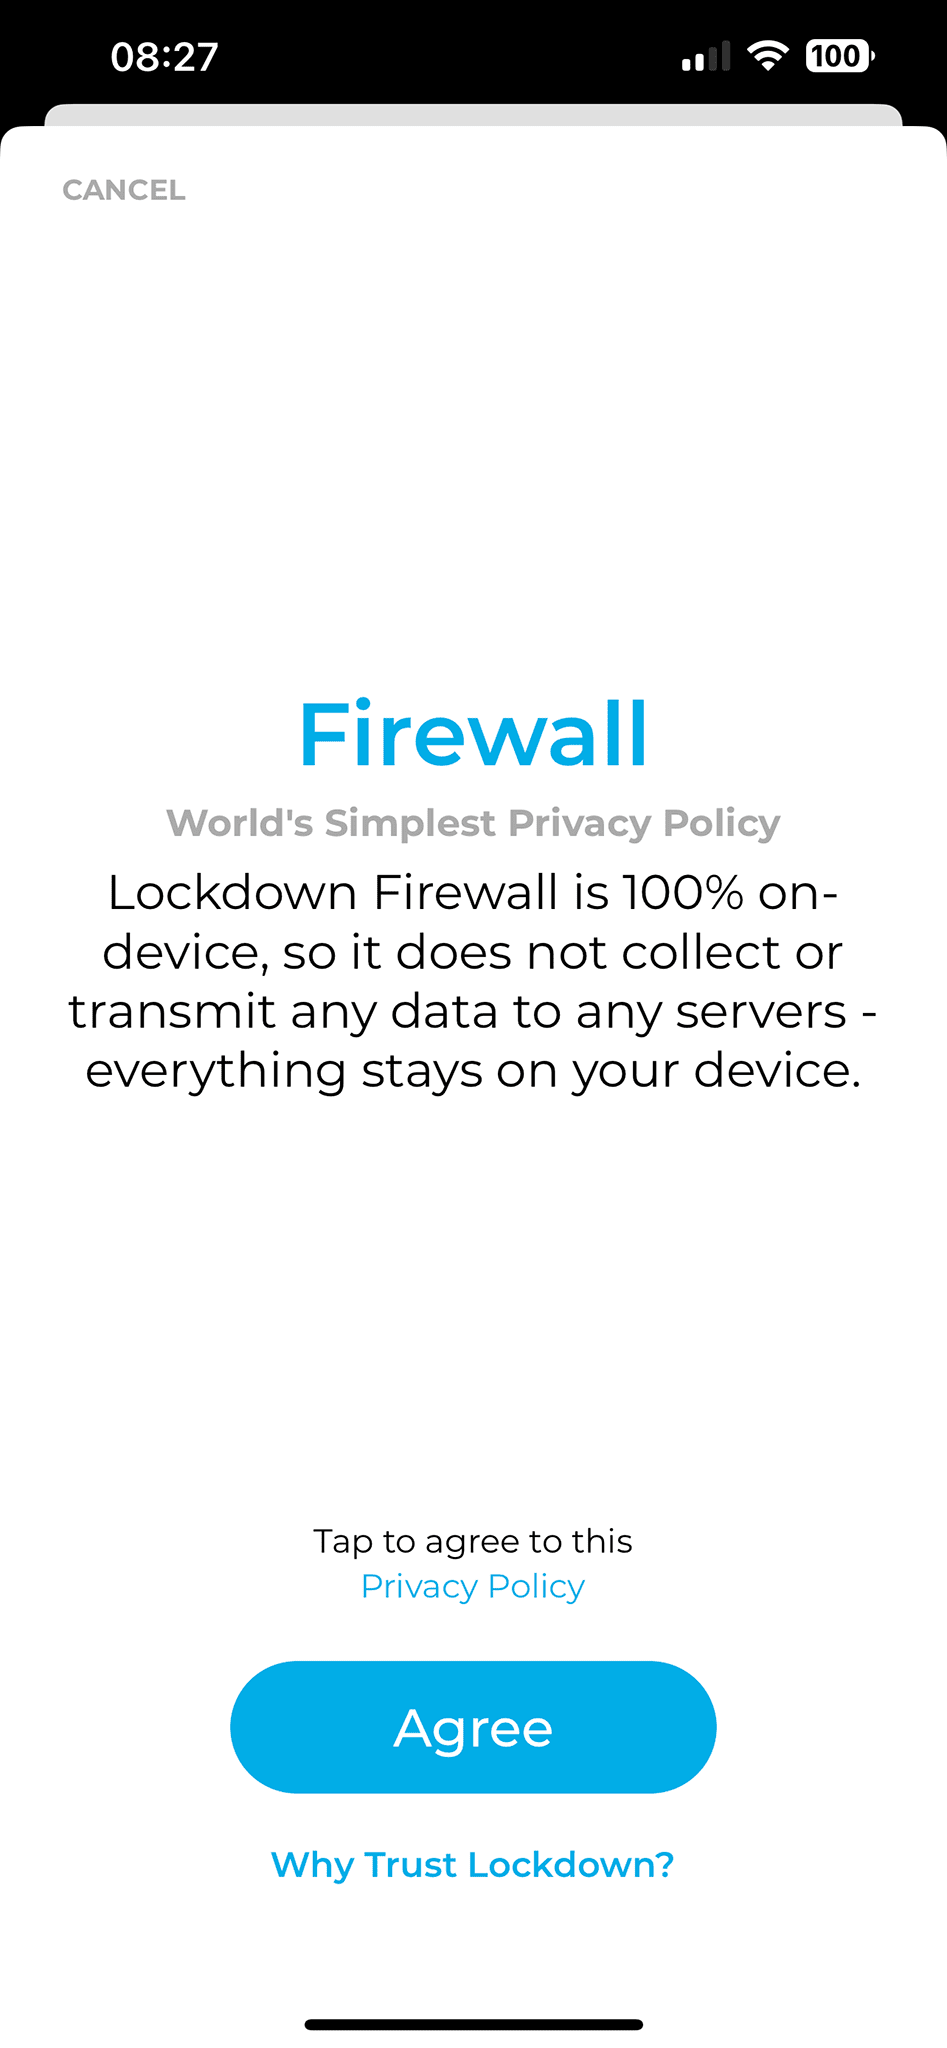 Lockdown Privacy - First screen after activating the firewall